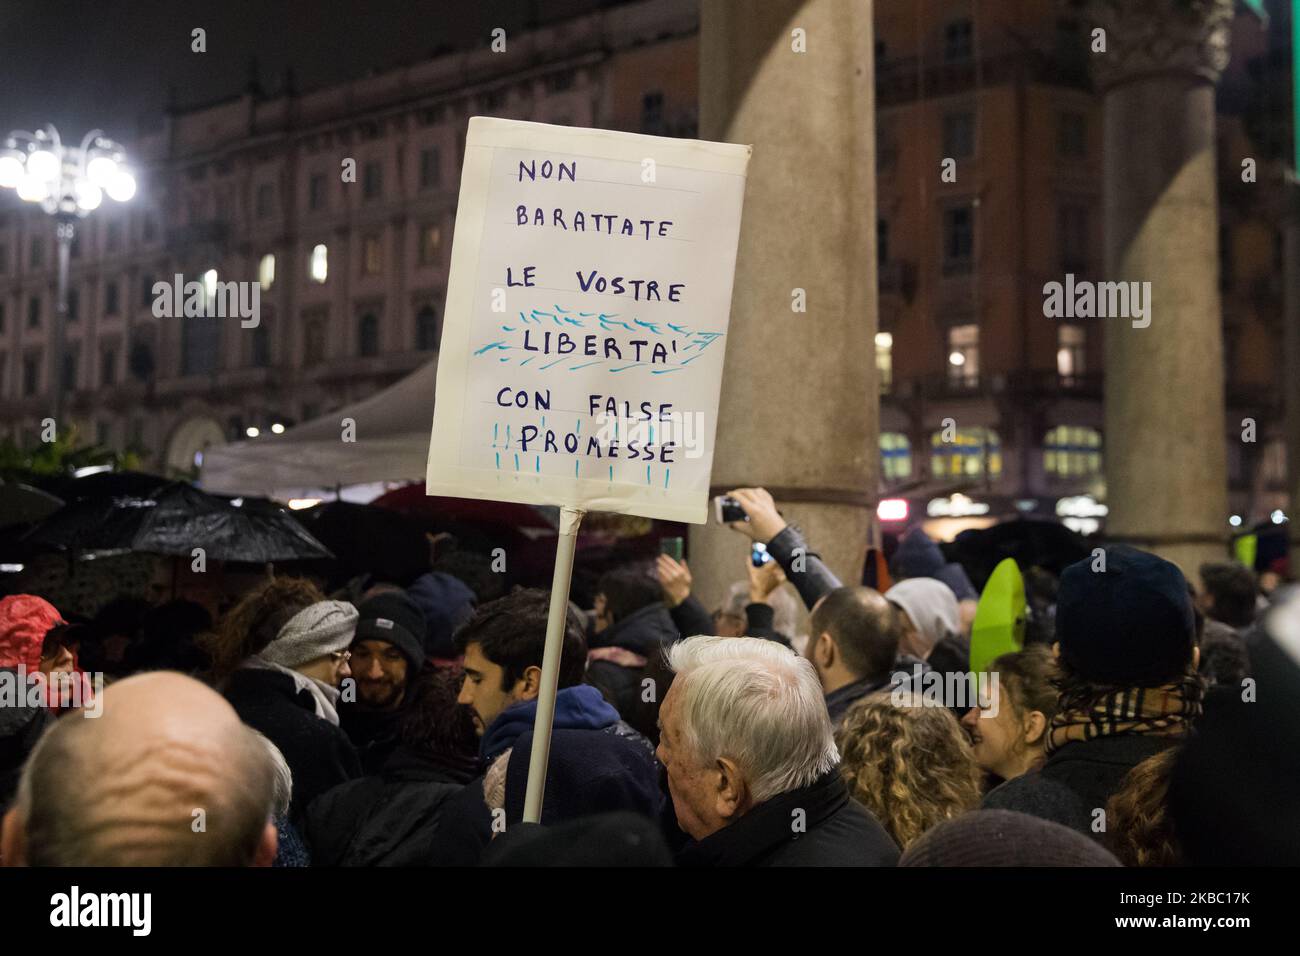 Milan, Italy, Sunday, December 01, 2019. Thousands of people gathered in Piazza Duomo in Milan for the ‘Sardine’ movement, to demonstrate against Salvini the leader of the 'Lega nord' to reassert values of tolerance and moderation. The people create a collective singsong, involving the old Resistance favourite, Bella Ciao. (Photo by Mauro Ujetto/NurPhoto) Stock Photo